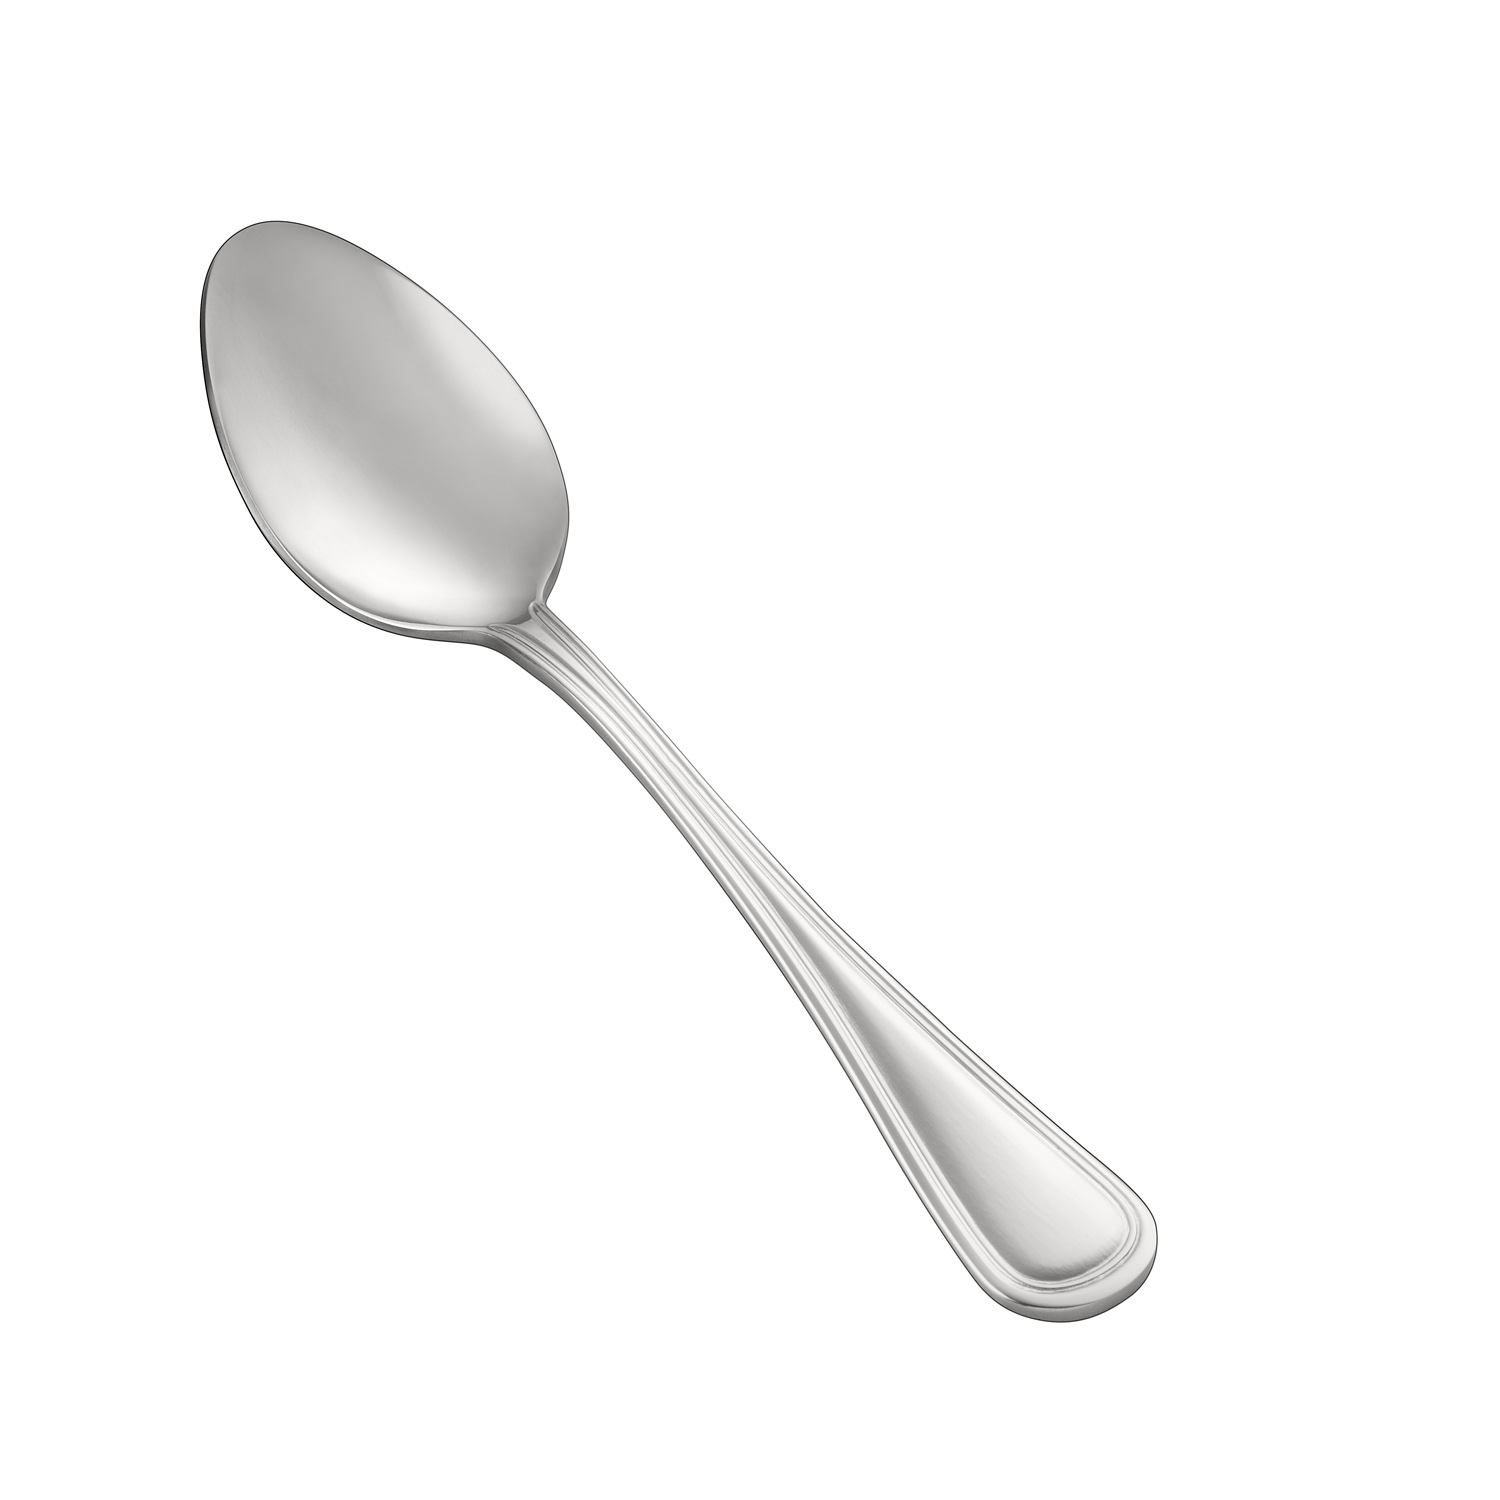 CAC China 8002-03 Elite Dinner Spoon, Extra Heavyweight 18/8, 7 1/4"